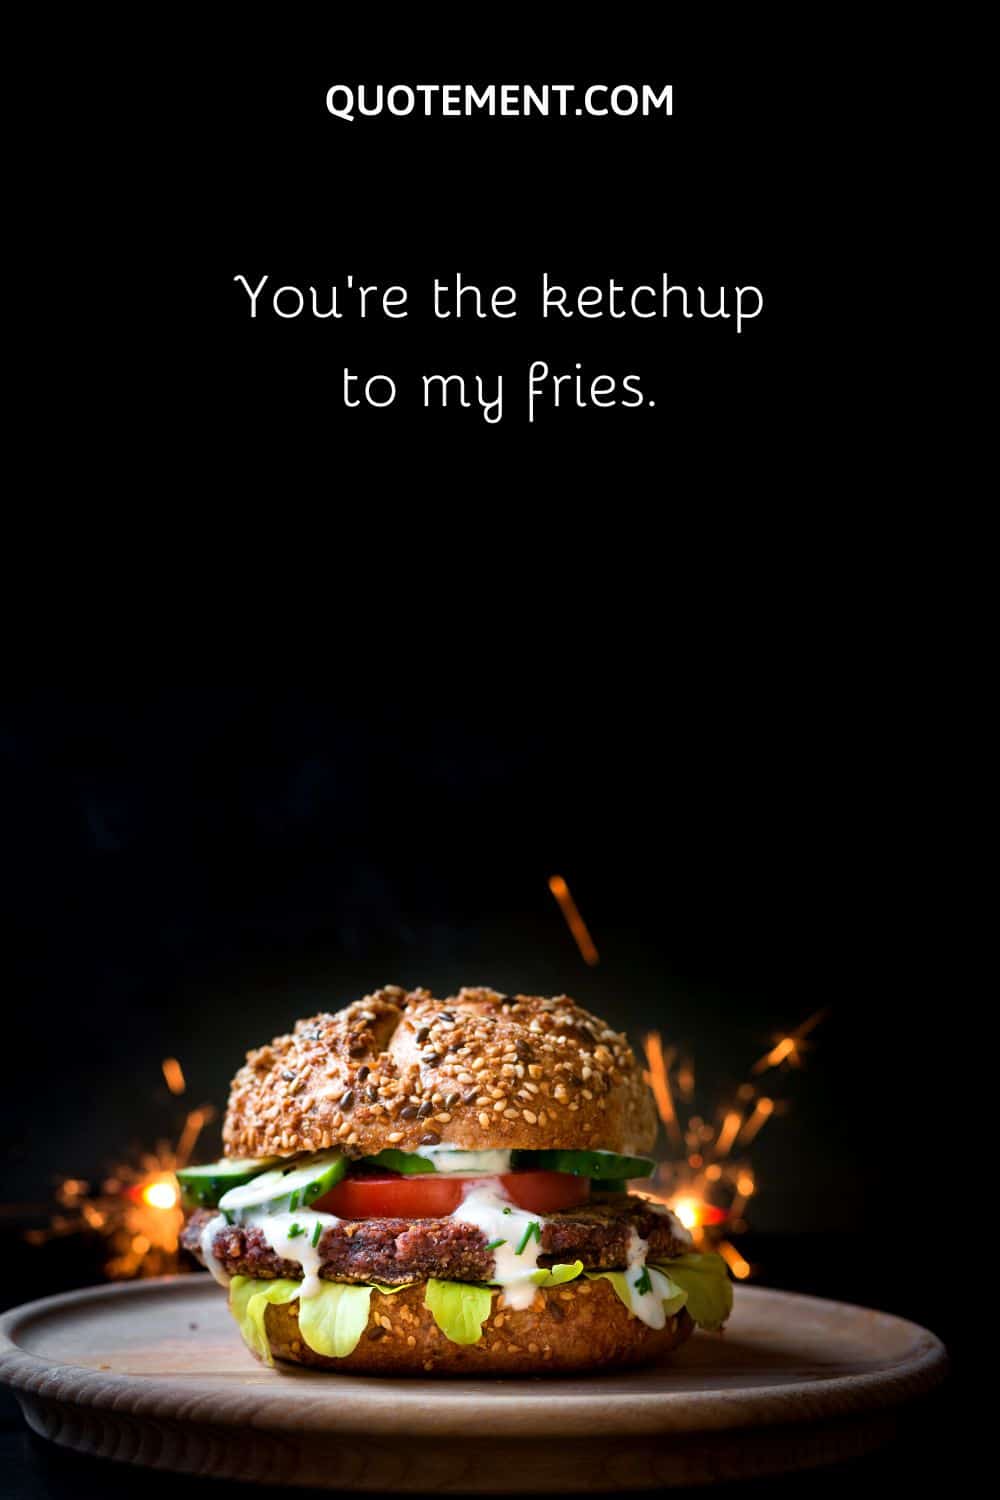 You’re the ketchup to my fries.